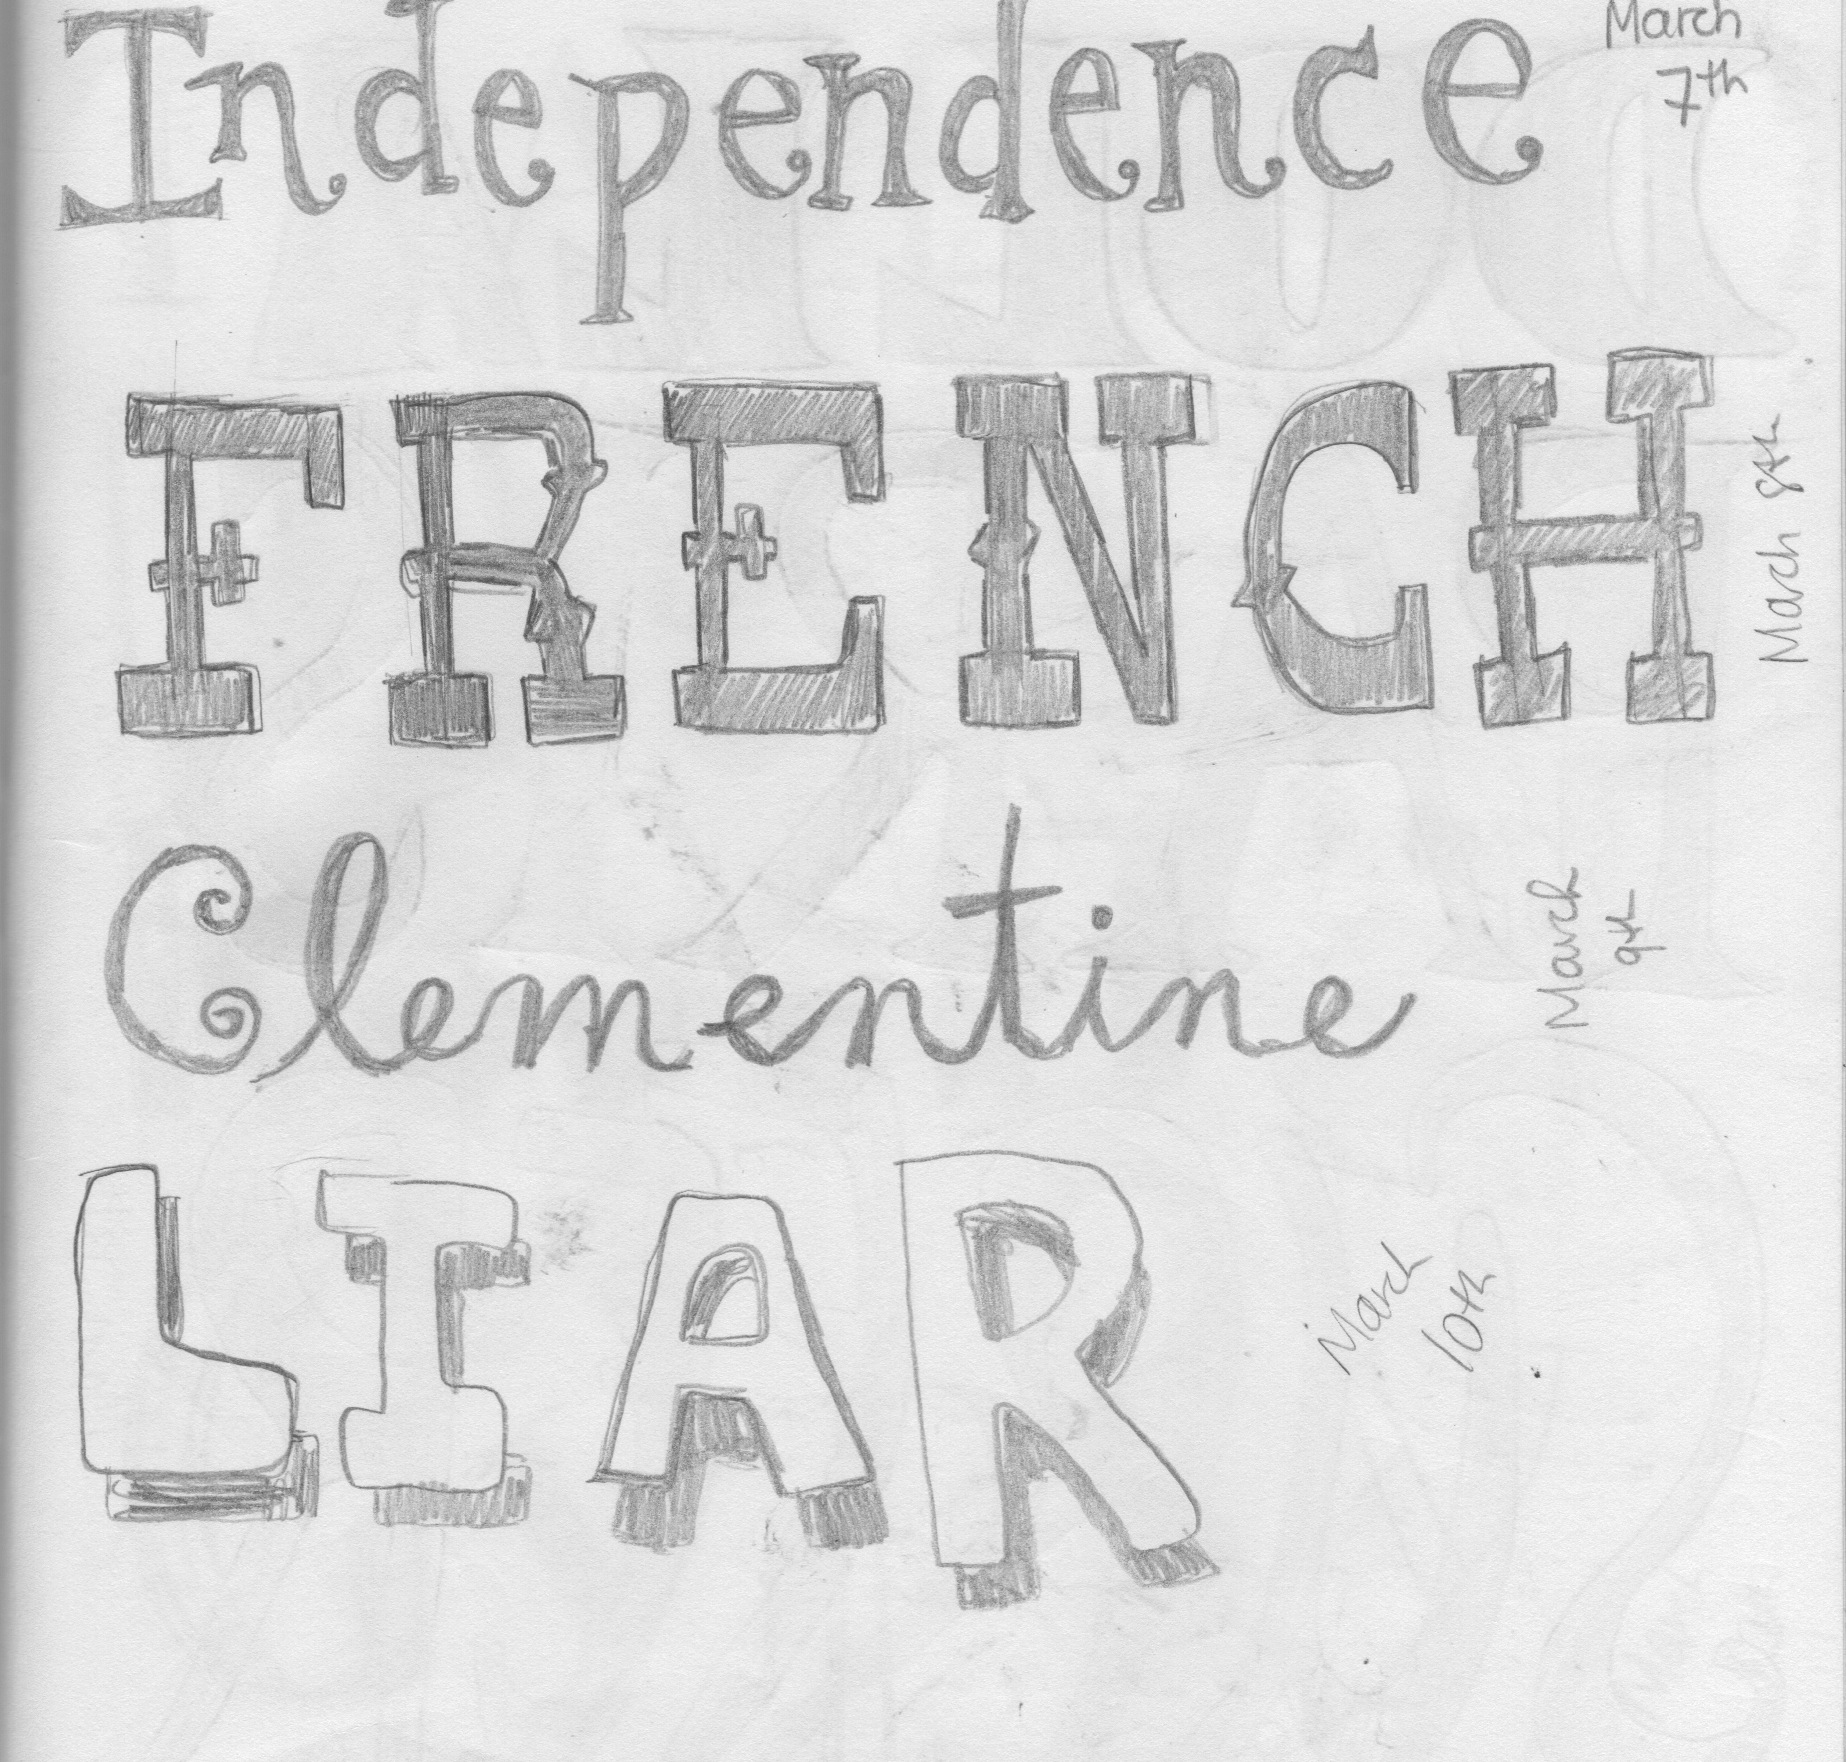 From a Judy Moody book, from a menu (French toast!), from a Clementine book, and from Liar and Spy.